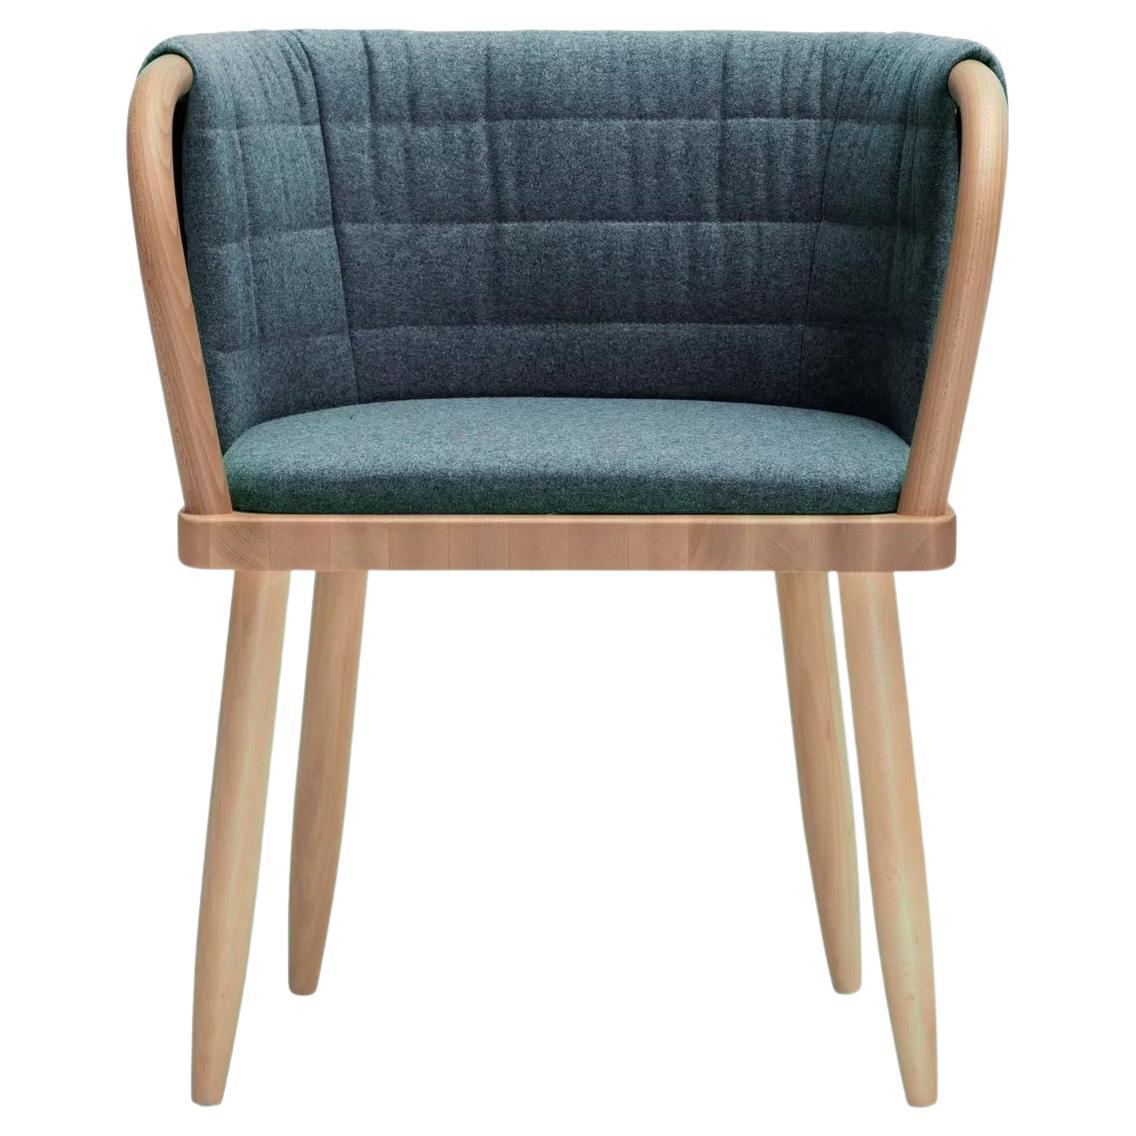 Contemporary Dining Chair with Curved Wooden Arms